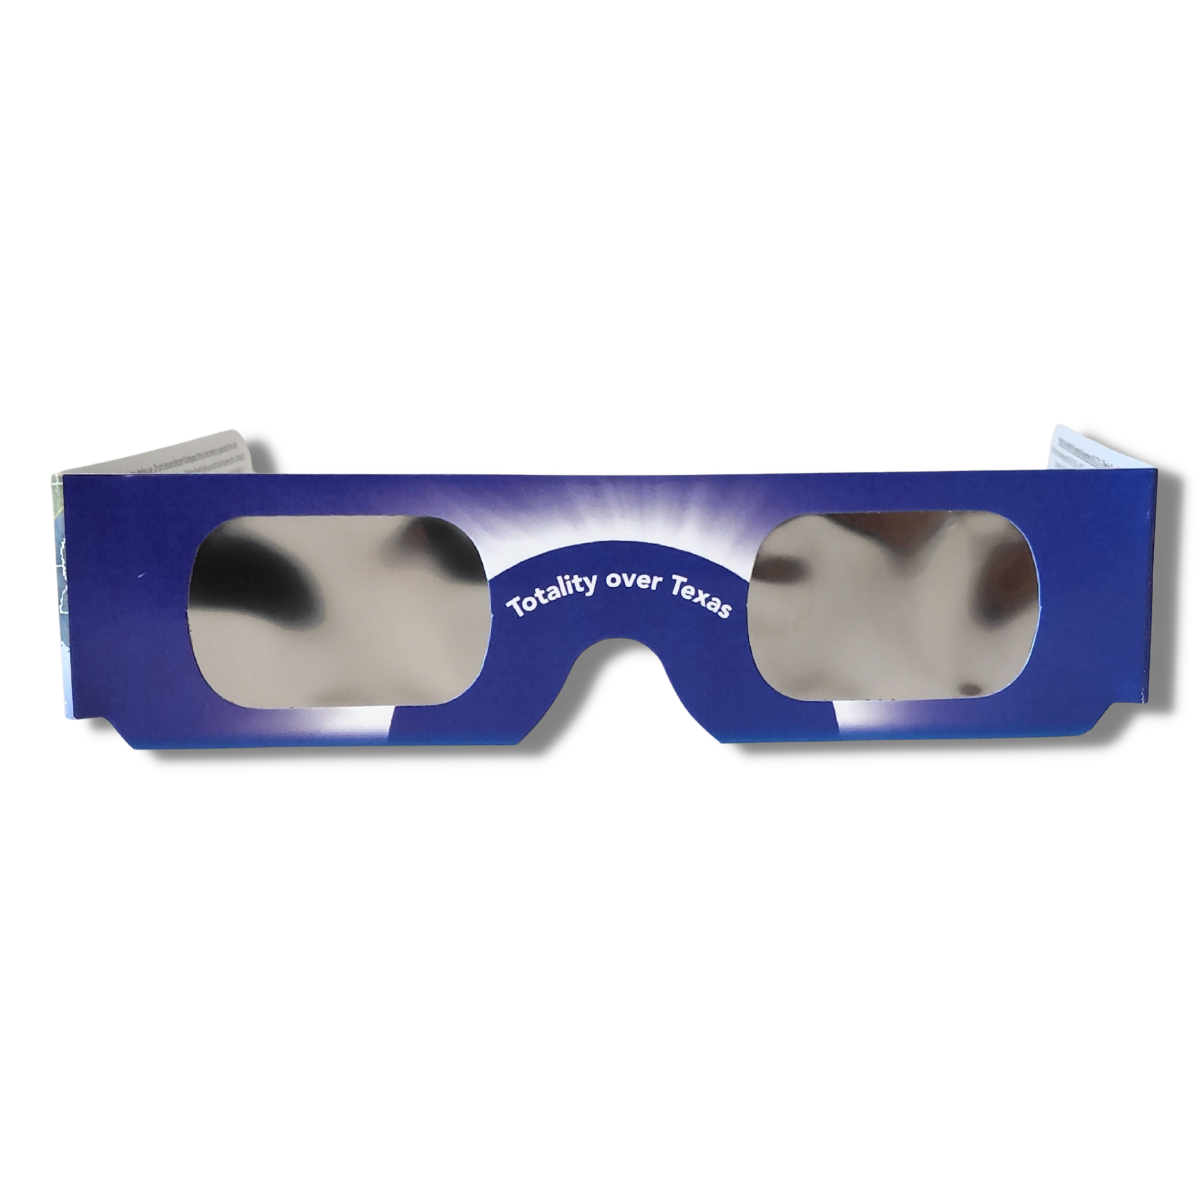 Solar Eclipse Glasses Pack of 4 Viewers ISO & CE Approved Sun Filter FREE Post 